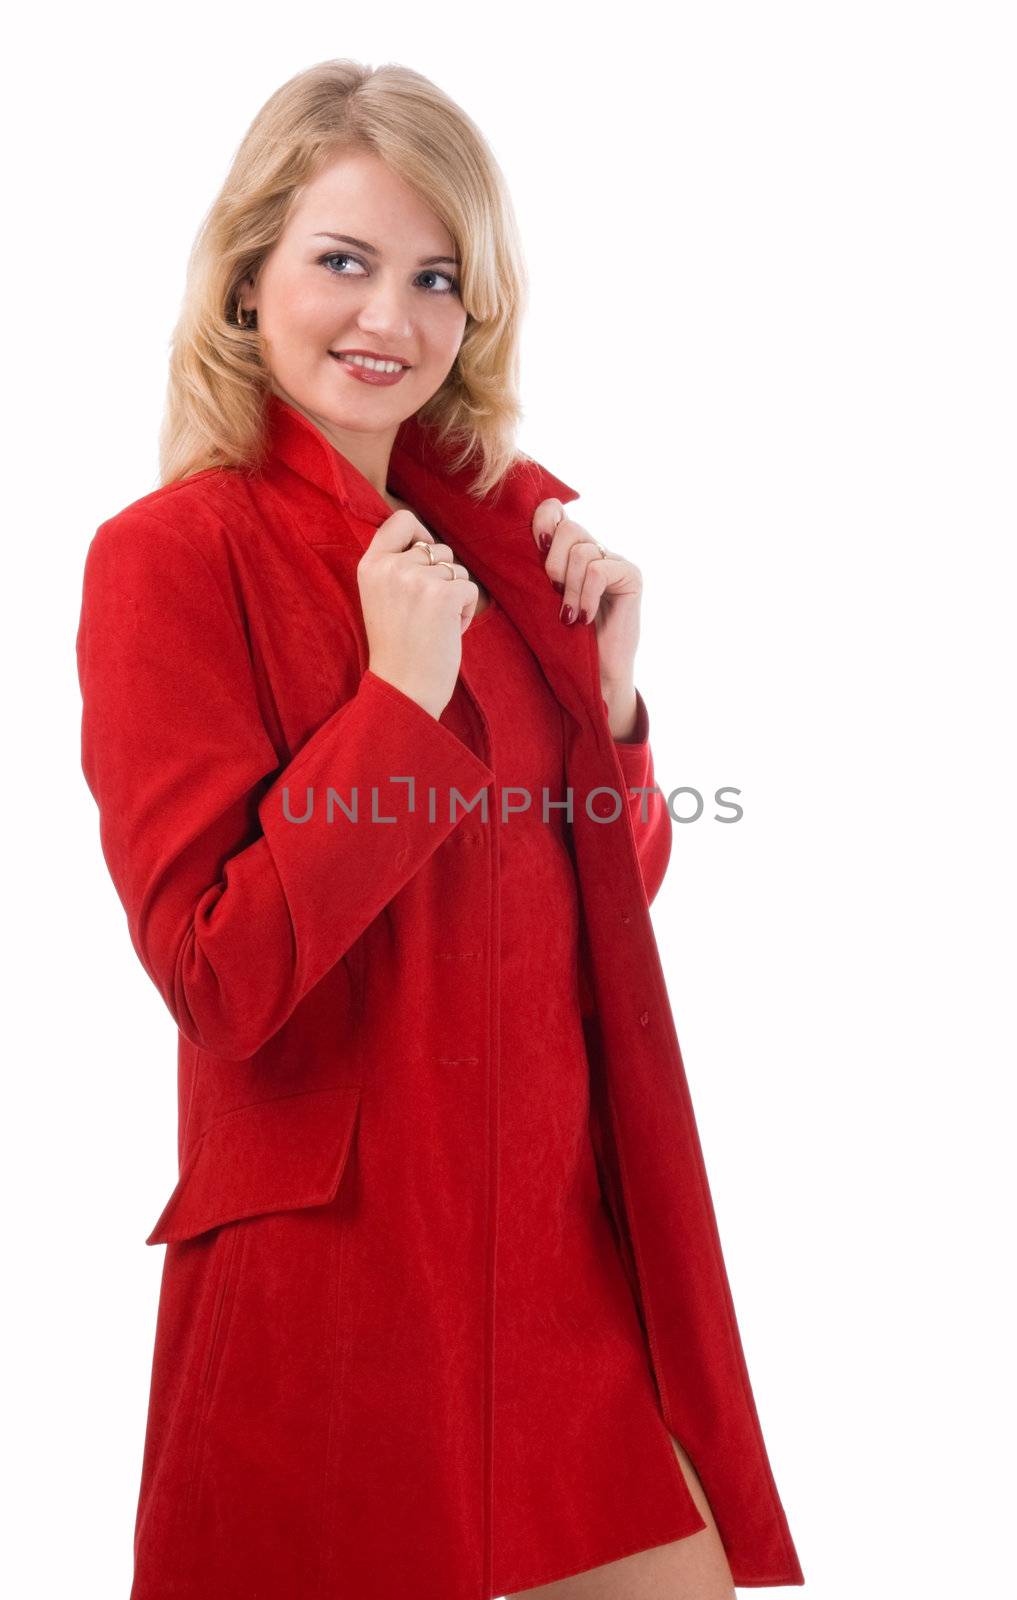 The young woman in a red coat, isolated on white background